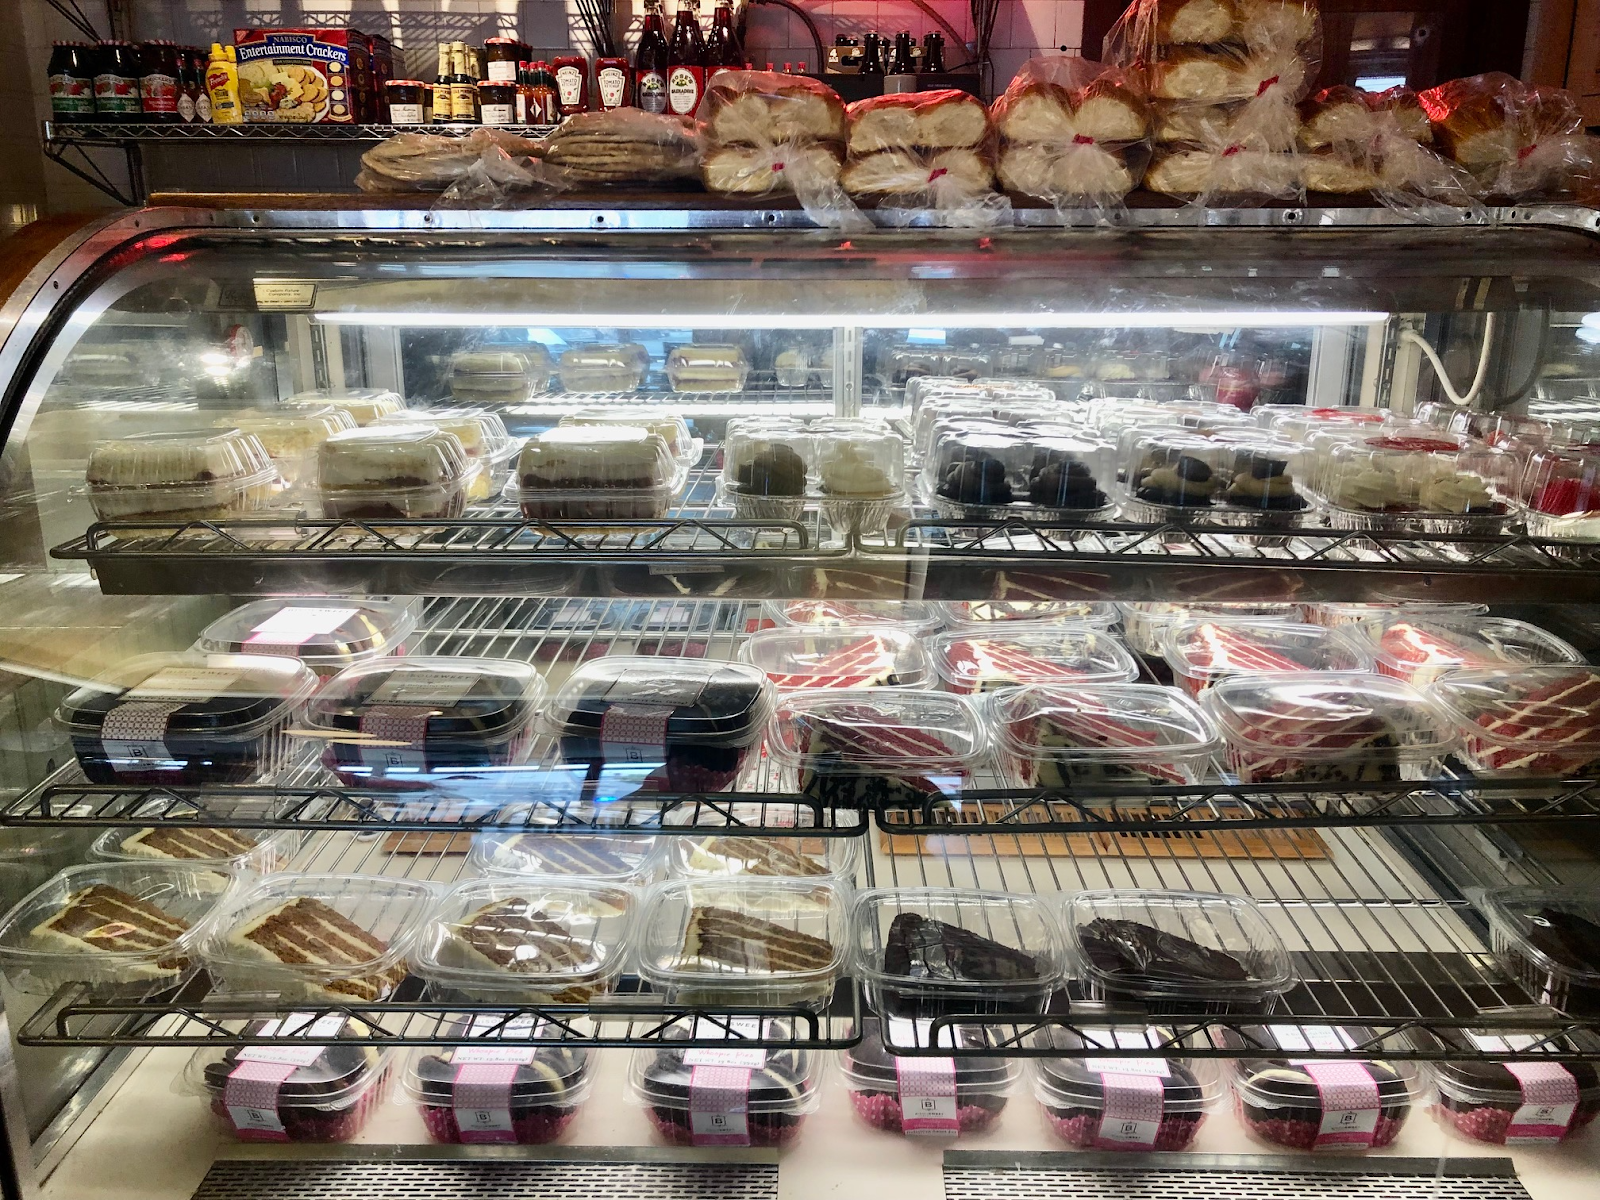 Clear case with four rows of prepared foods in clear containers